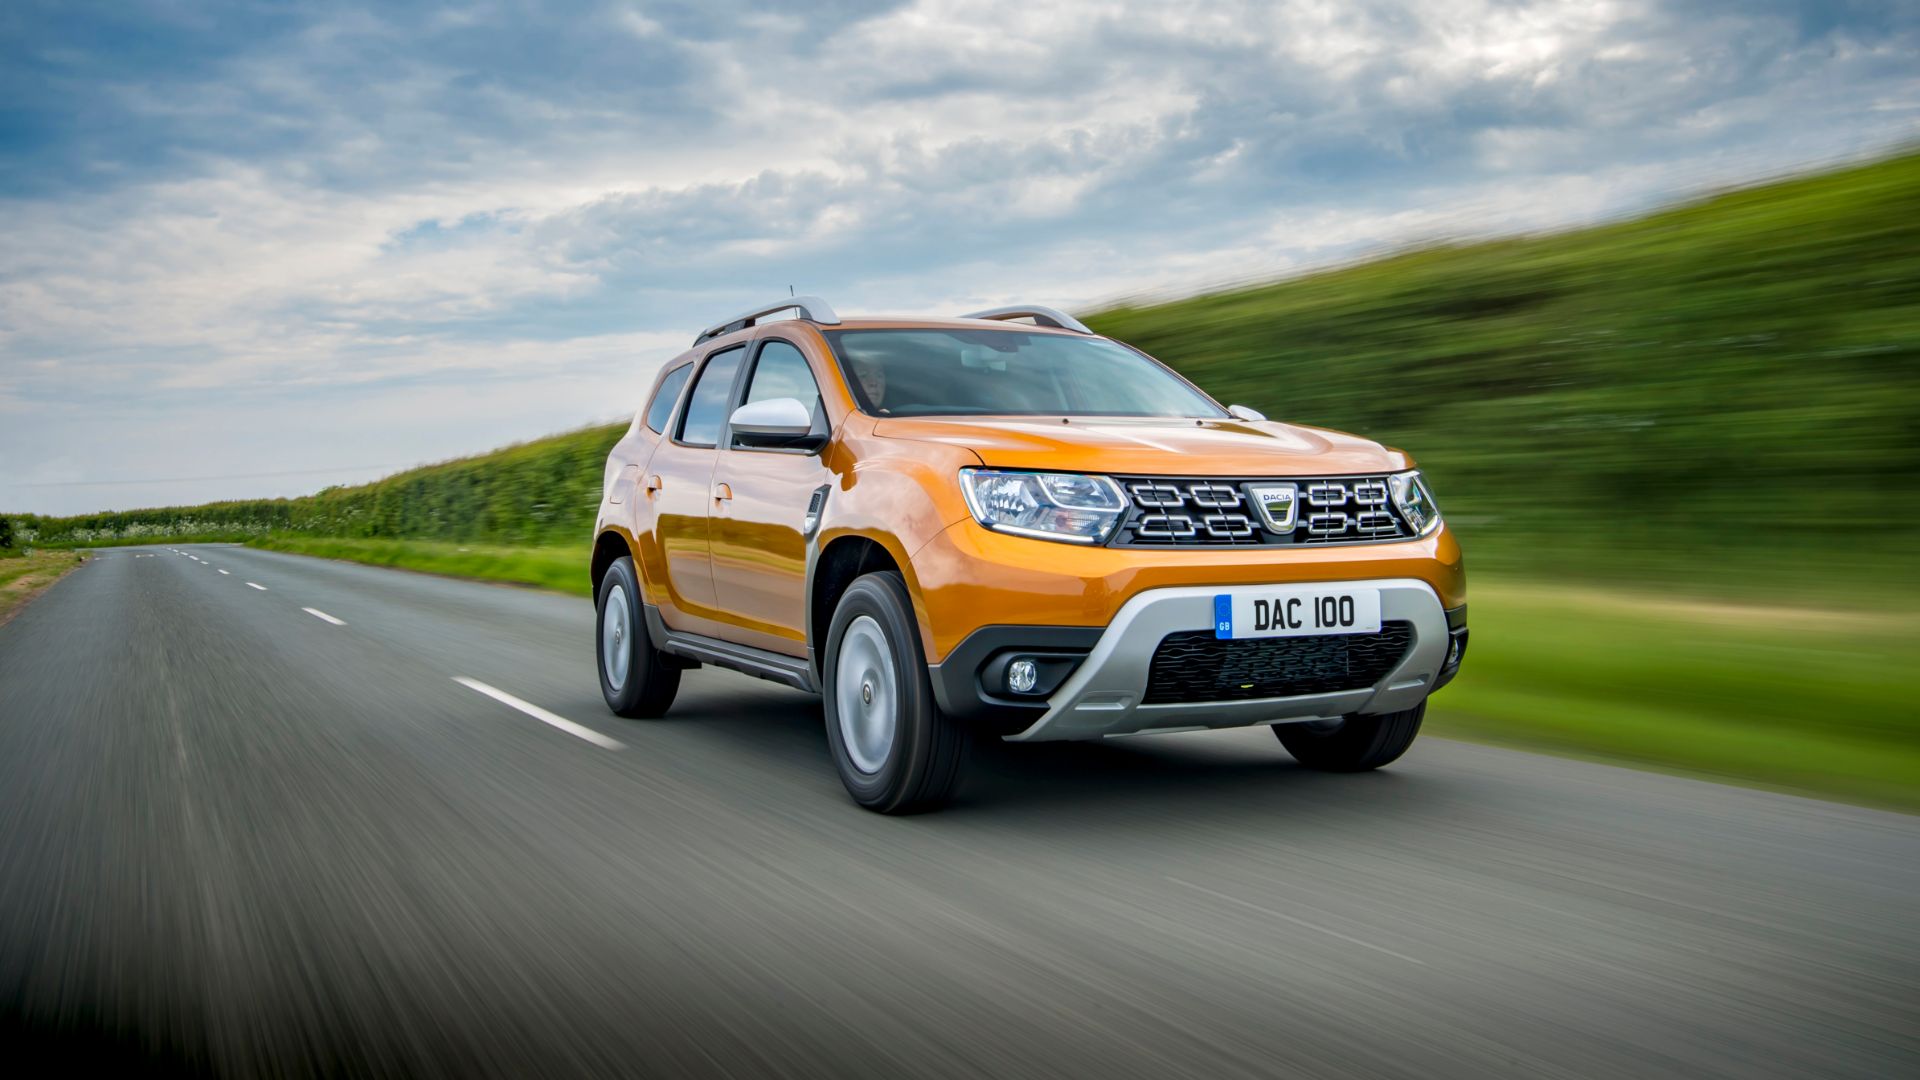 Dacia Duster is now more expensive